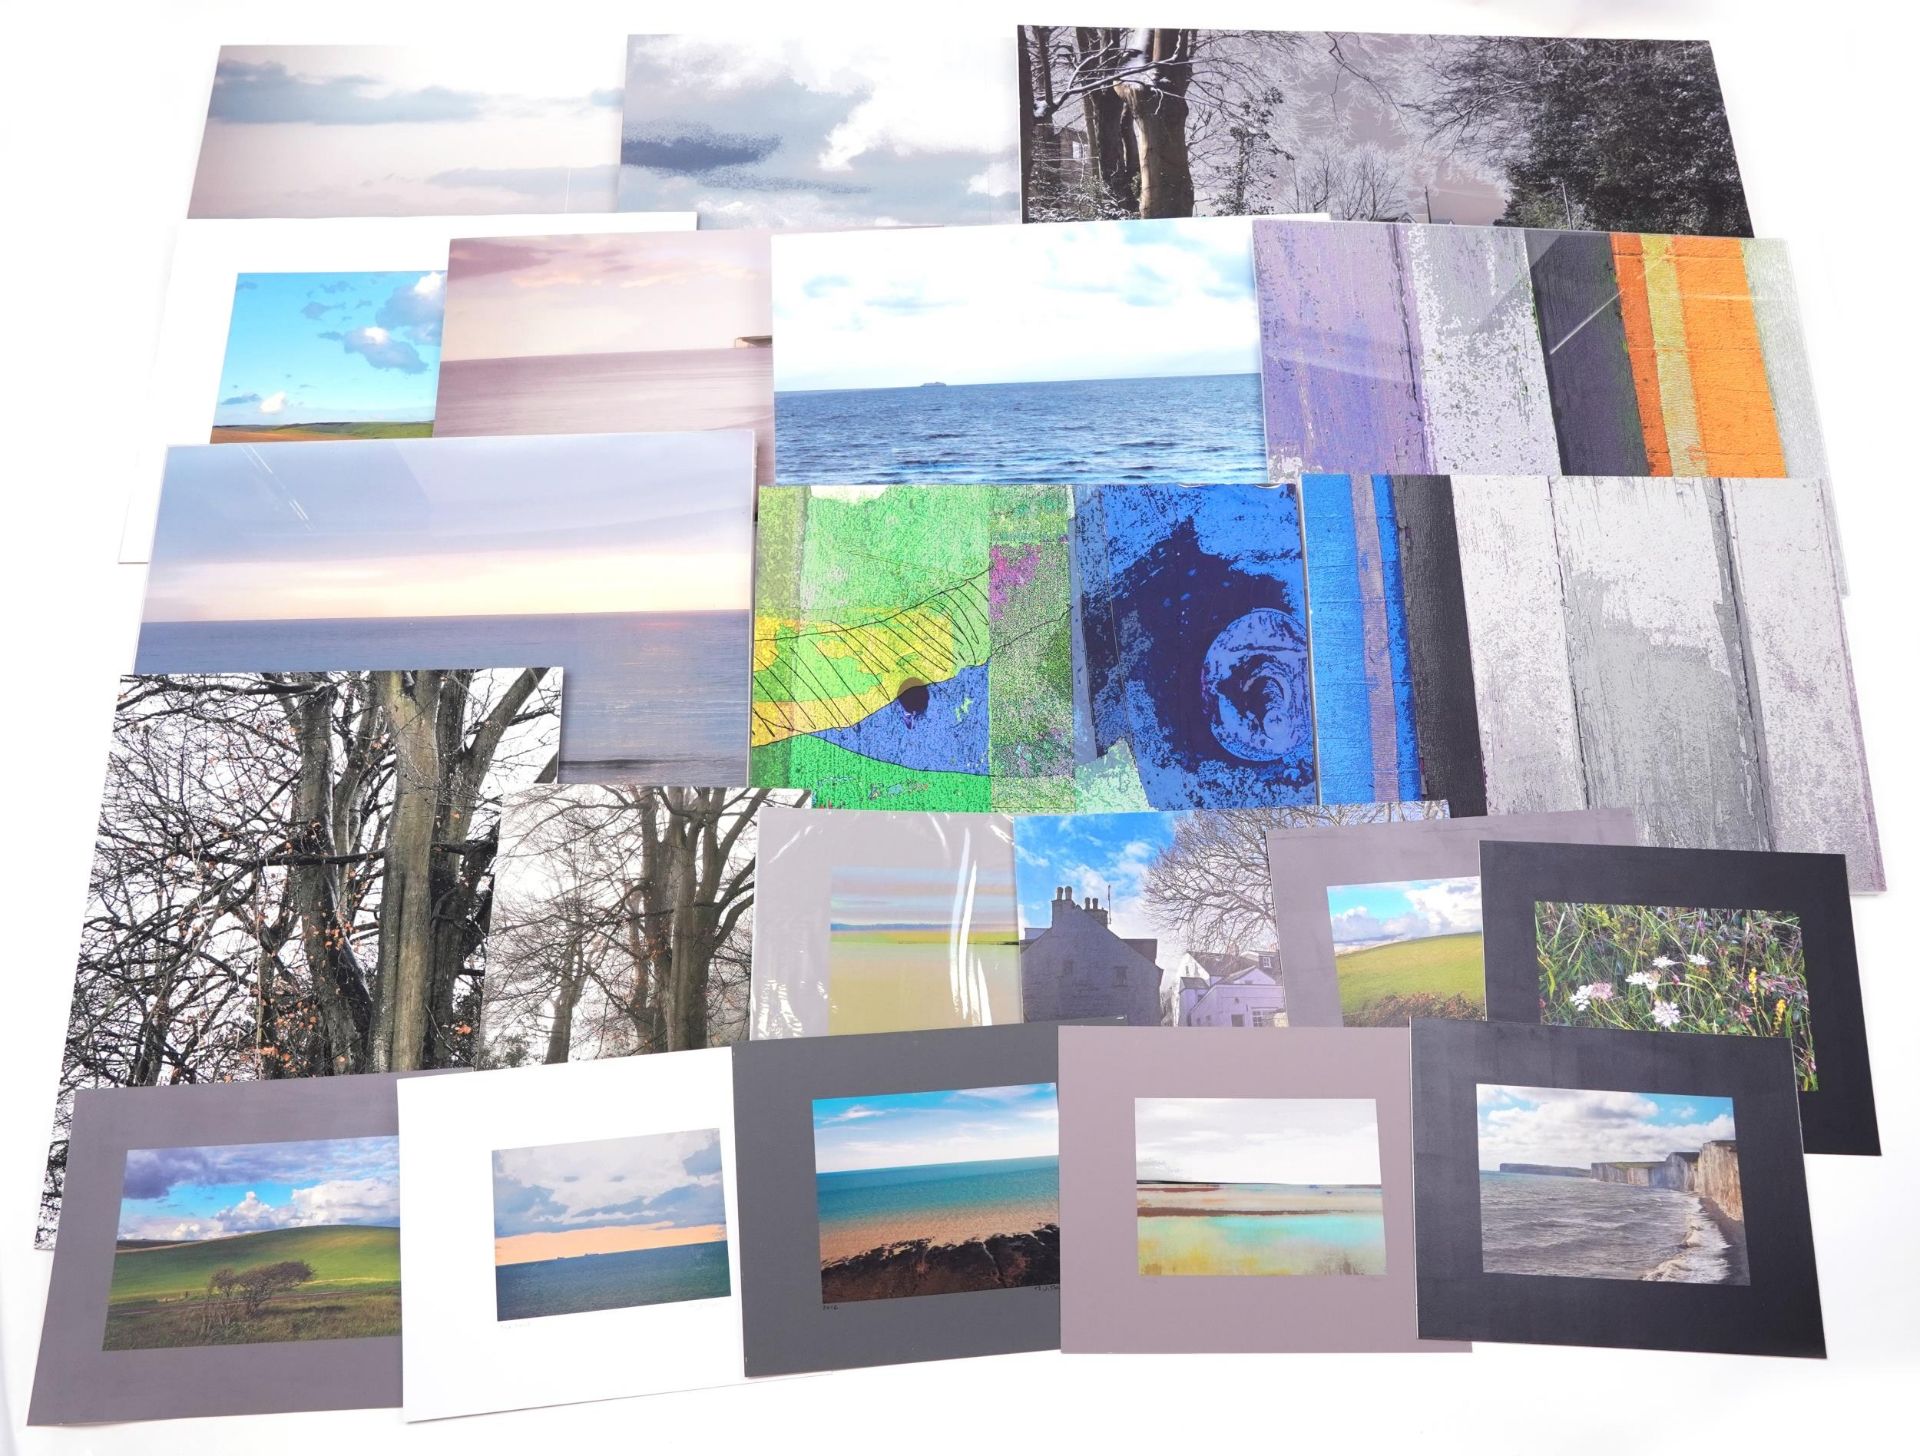 Collection of contemporary Richard Blower landscape art photography prints, some on board, the